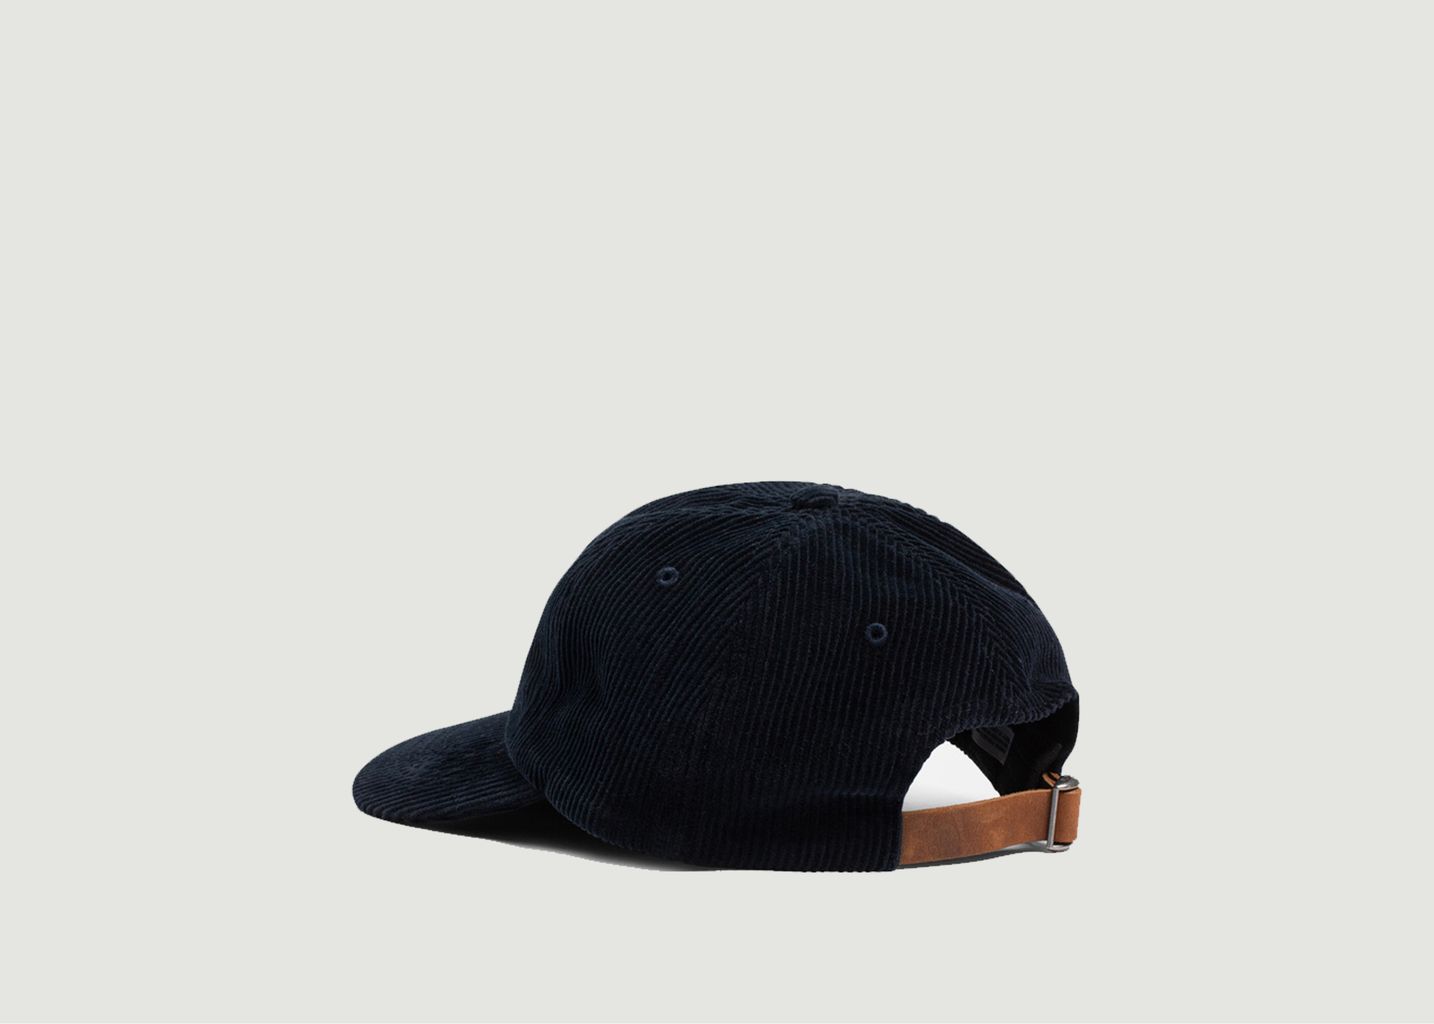 Mütze aus Cord, - Norse Projects